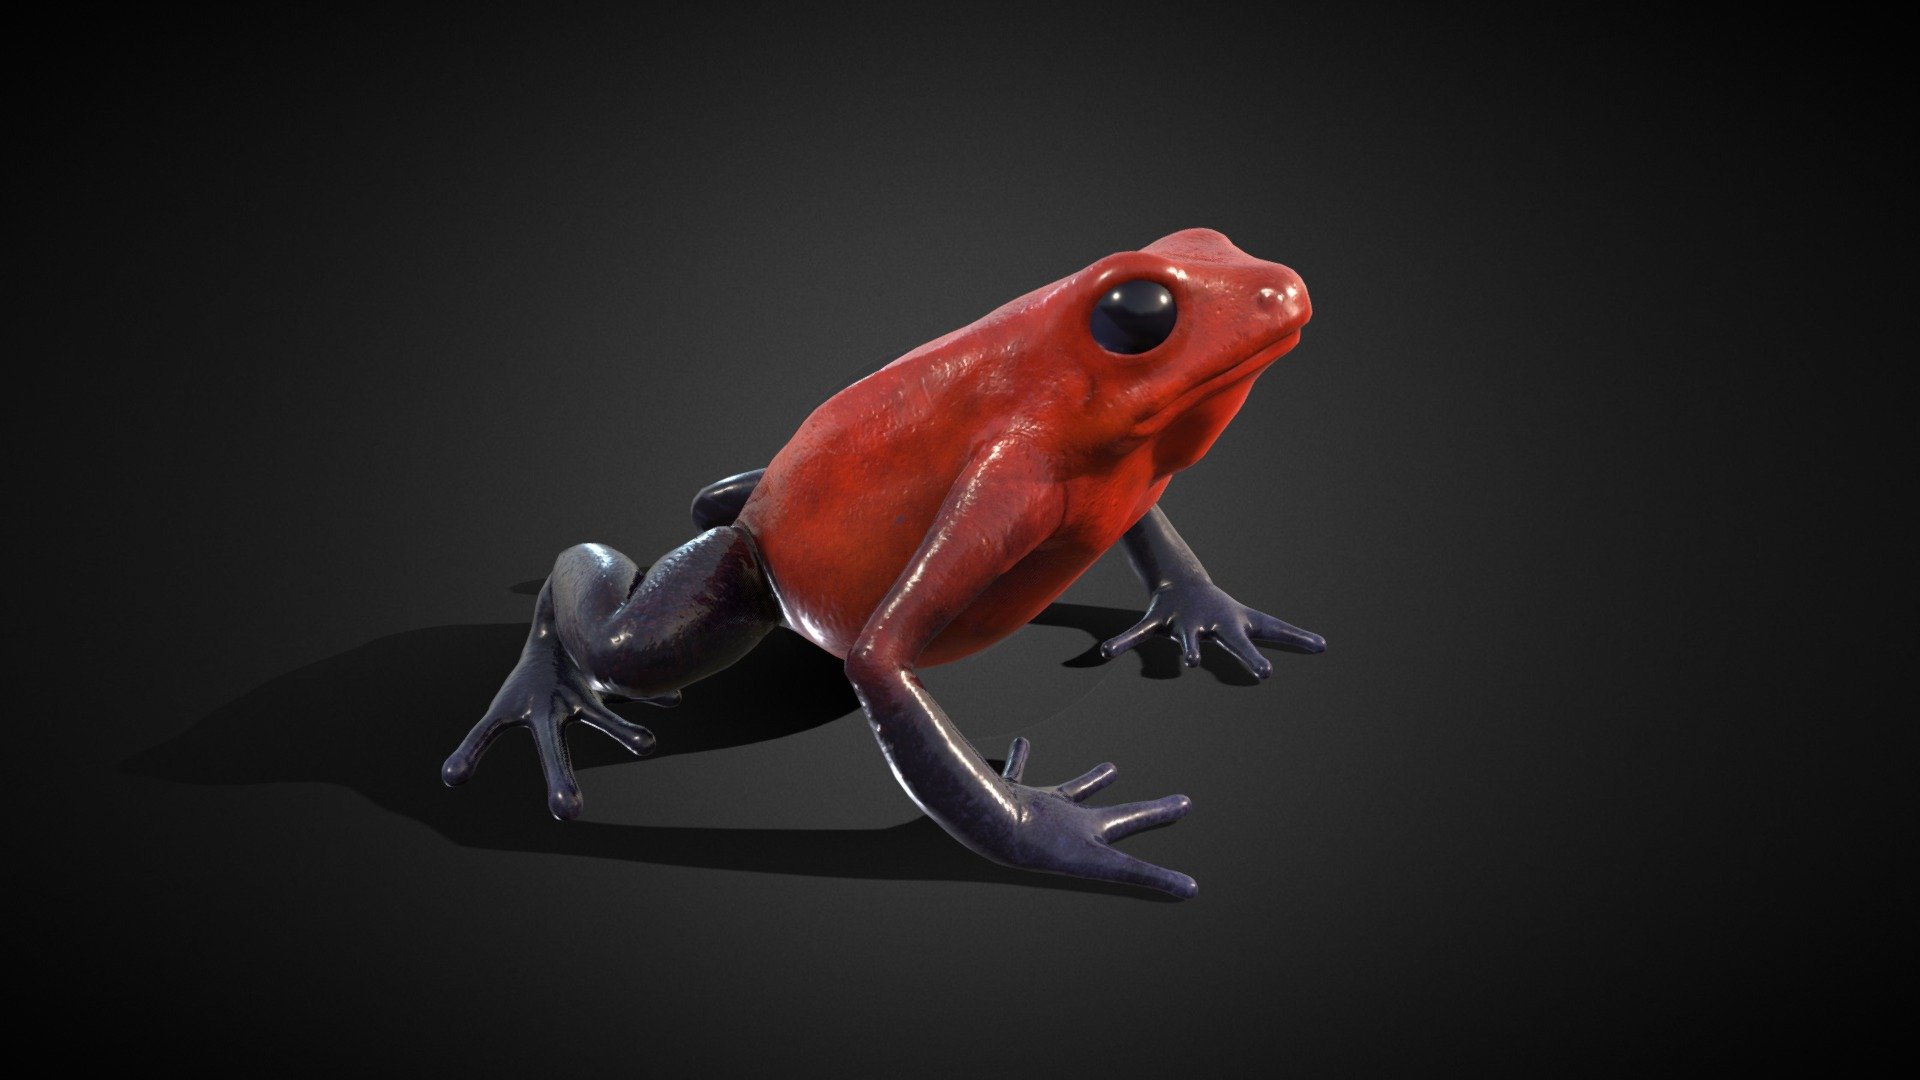 3D Model -The strawberry poison frog, Oophaga pumilio




4k Textures

PBR Materials

Rig In Blender Ready for animation &ndash; 1 Idle animation

Blender file attachments 3d model